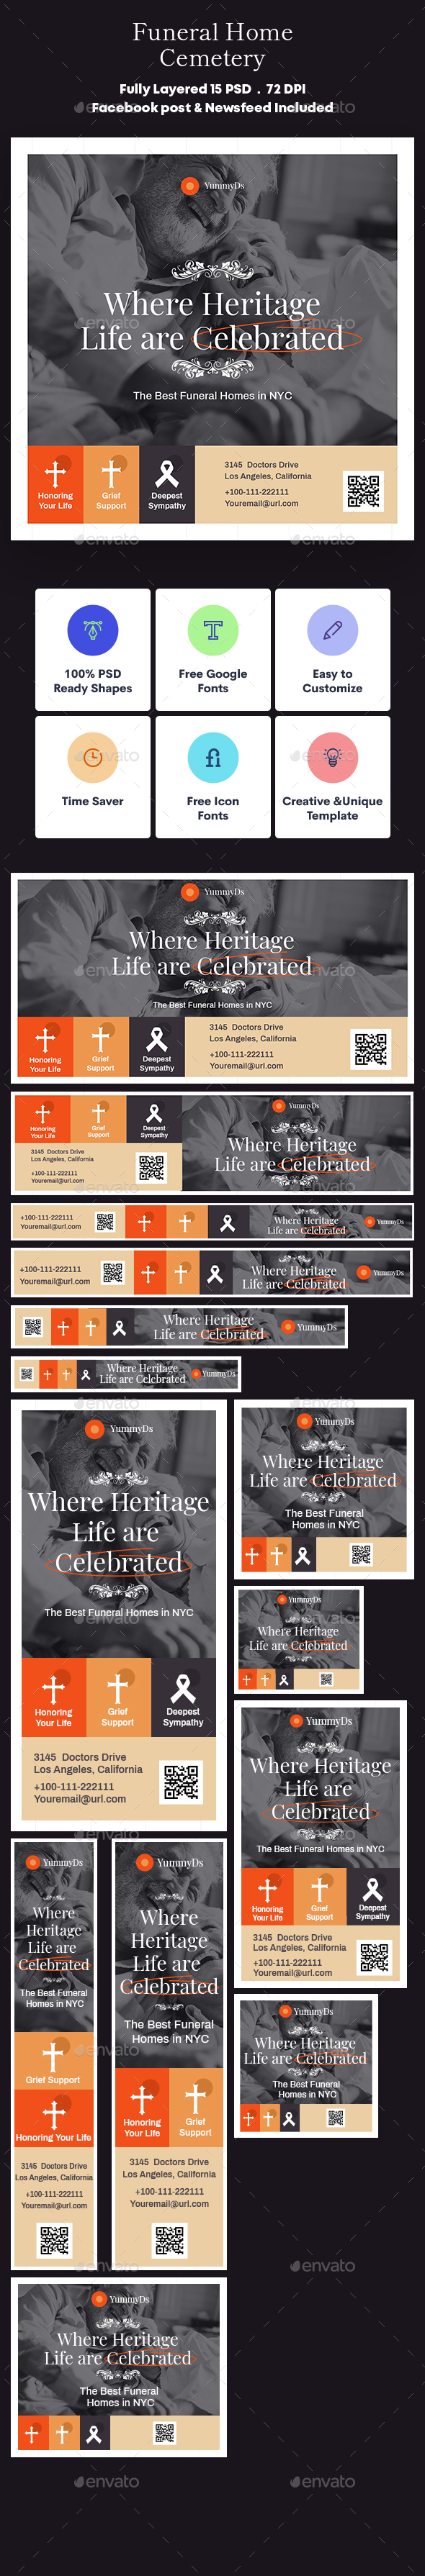 [DOWNLOAD]Funeral Home & Cemetery Banners Ad